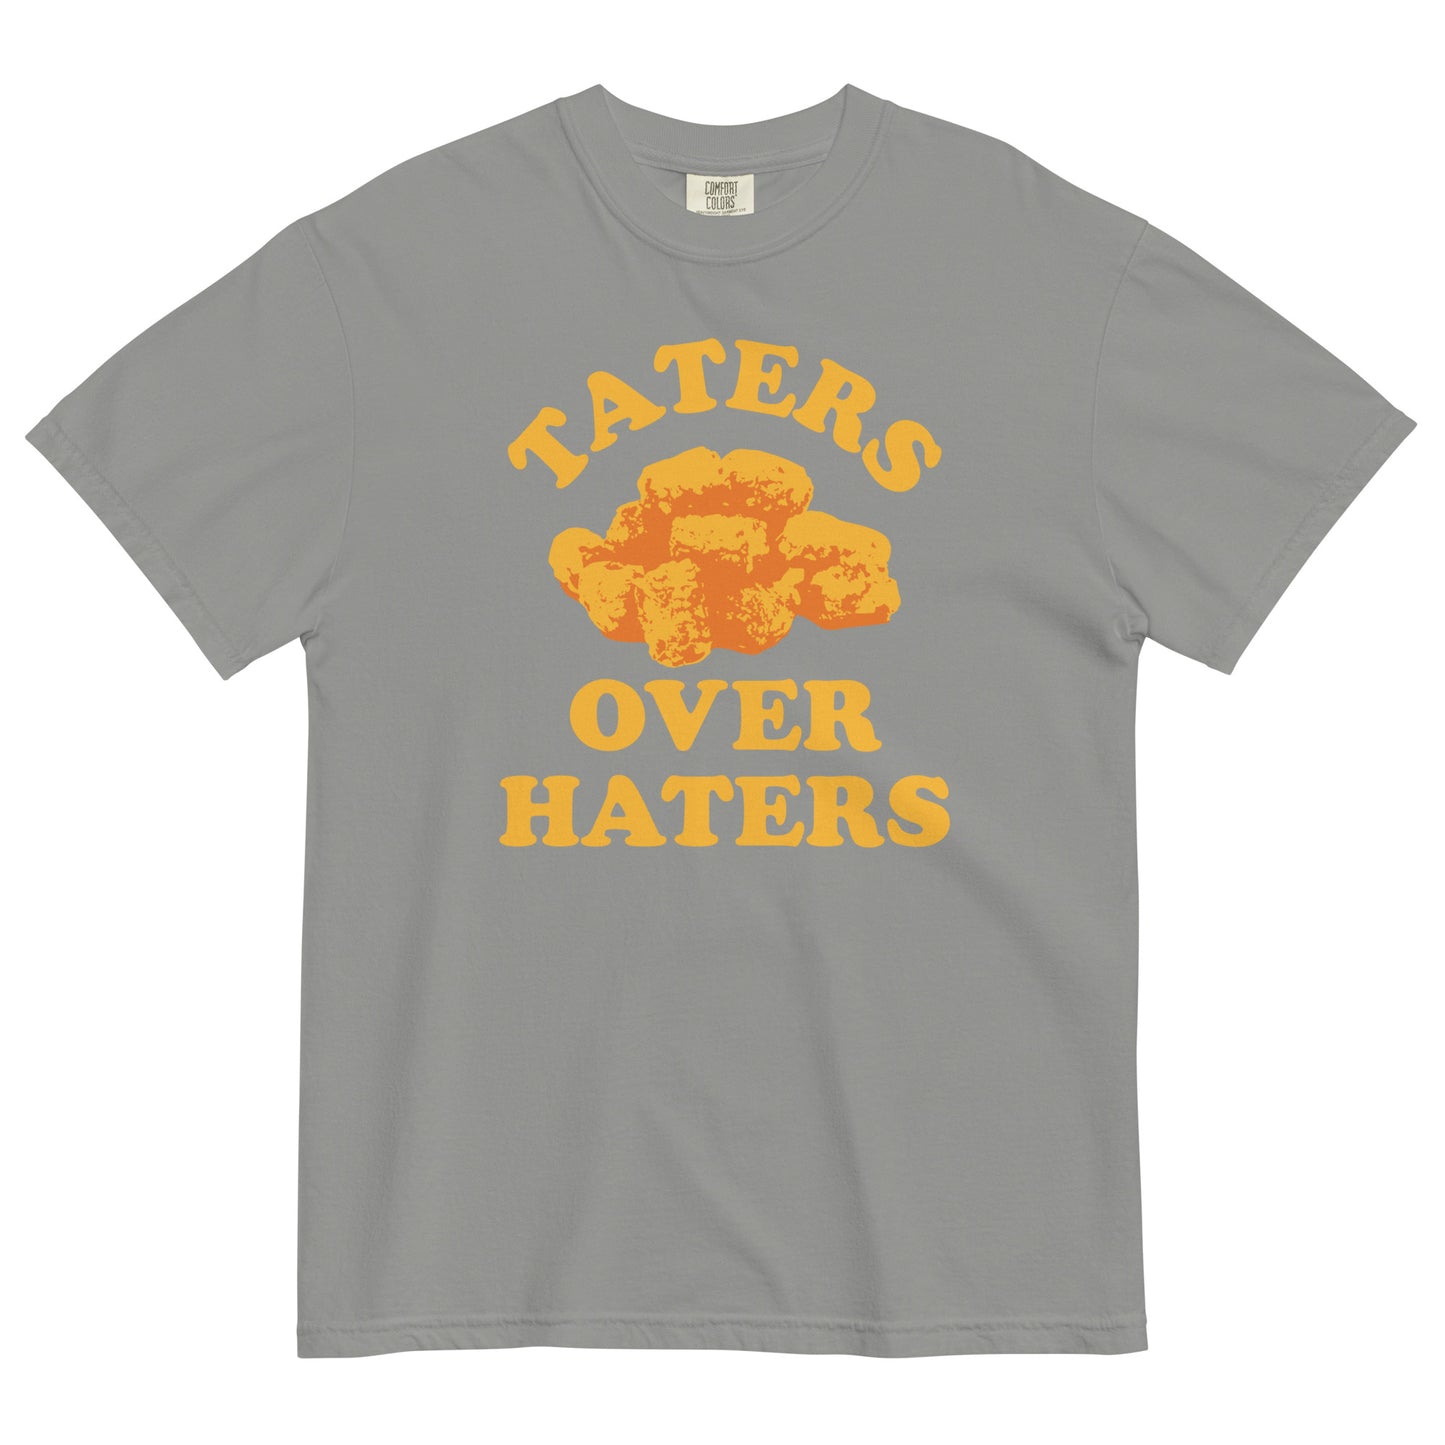 Taters Over Haters Men's Relaxed Fit Tee